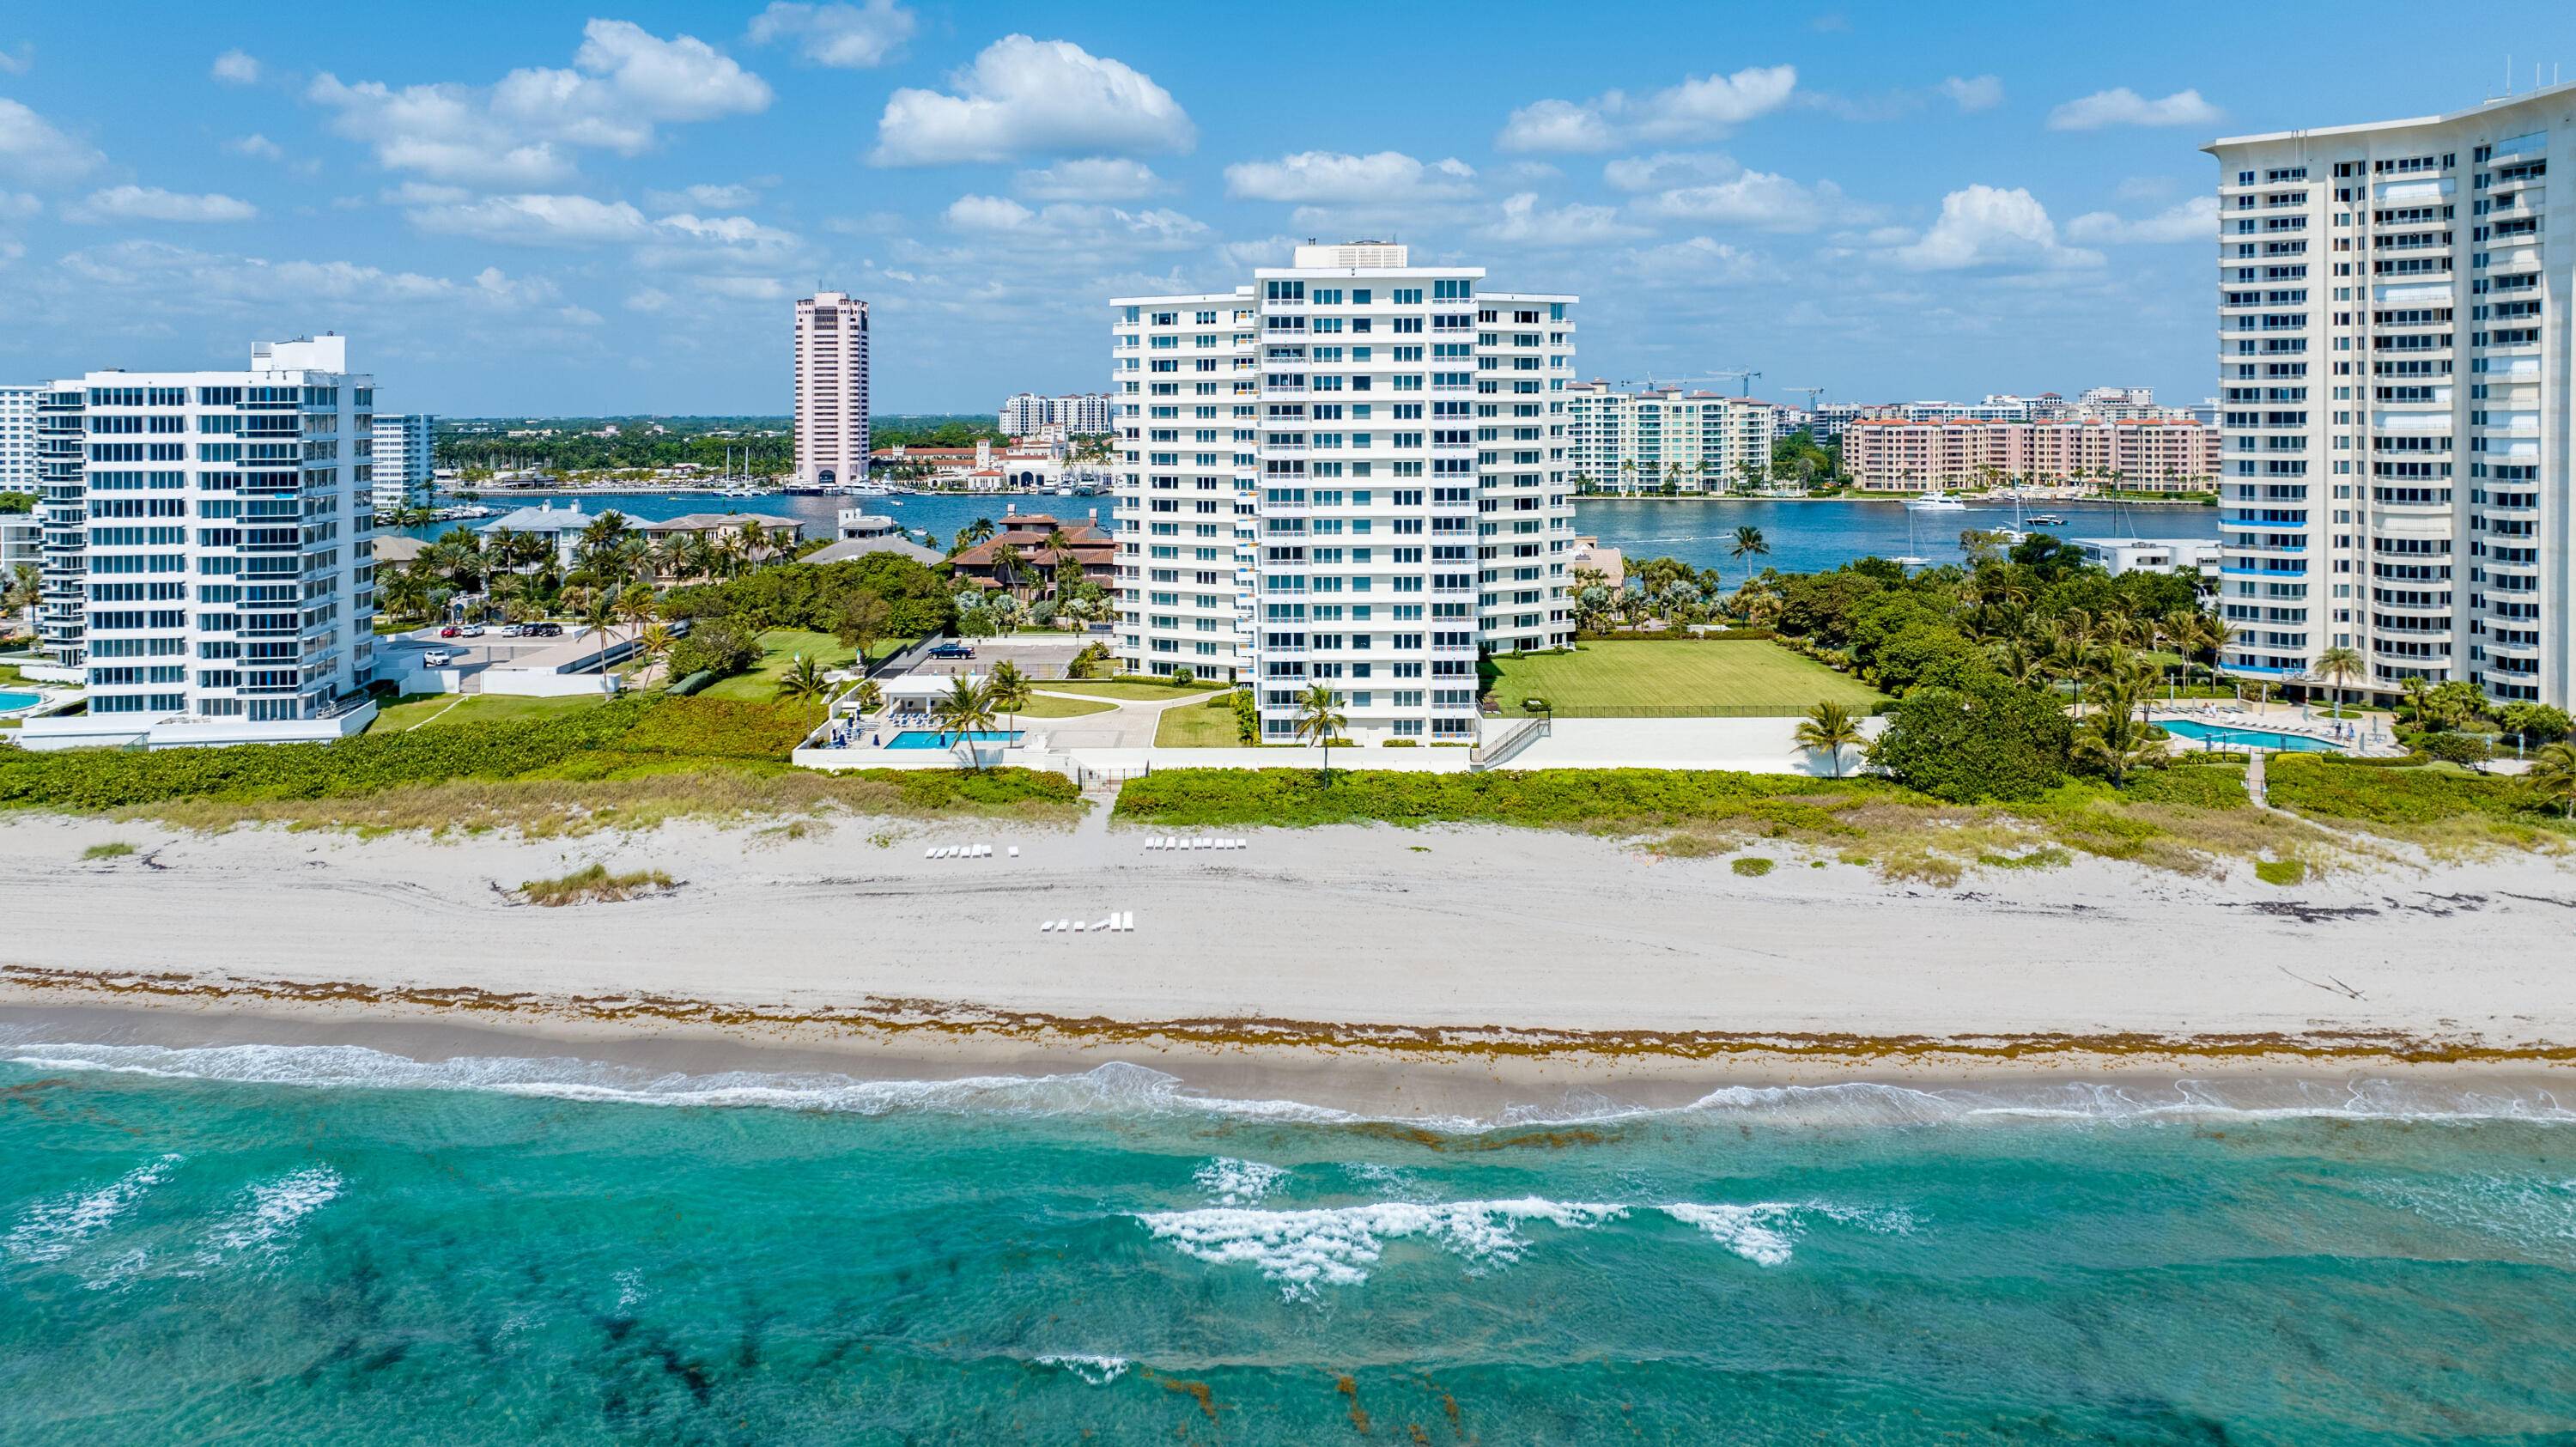 Absolutely stunning 2 bedroom, 2 bathroom condo in the exclusive Sabal Shores building.